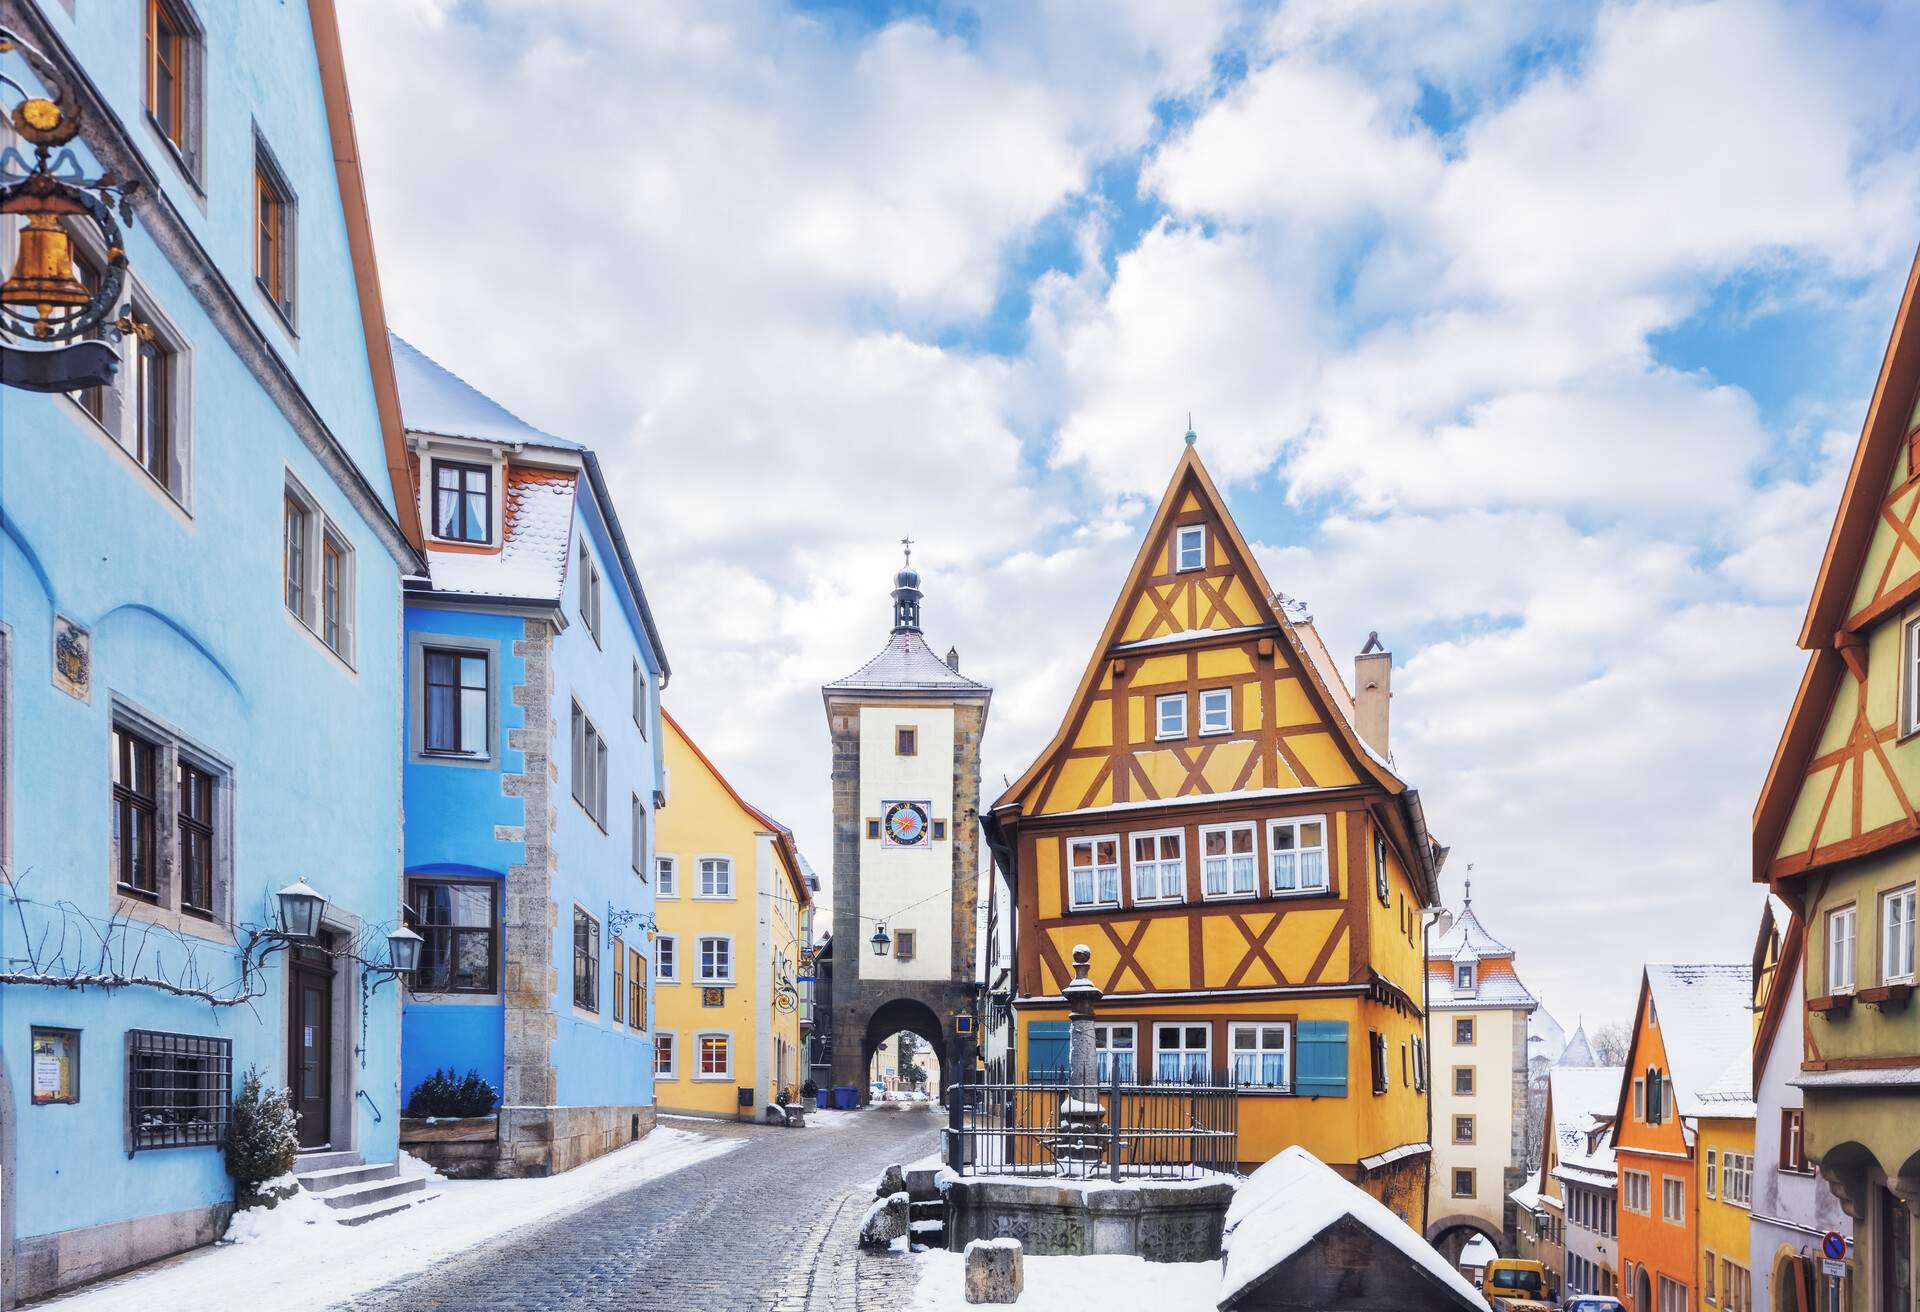 Colourful half-timbered houses lining a cobblestone street with a snow-covered sidewalk. 